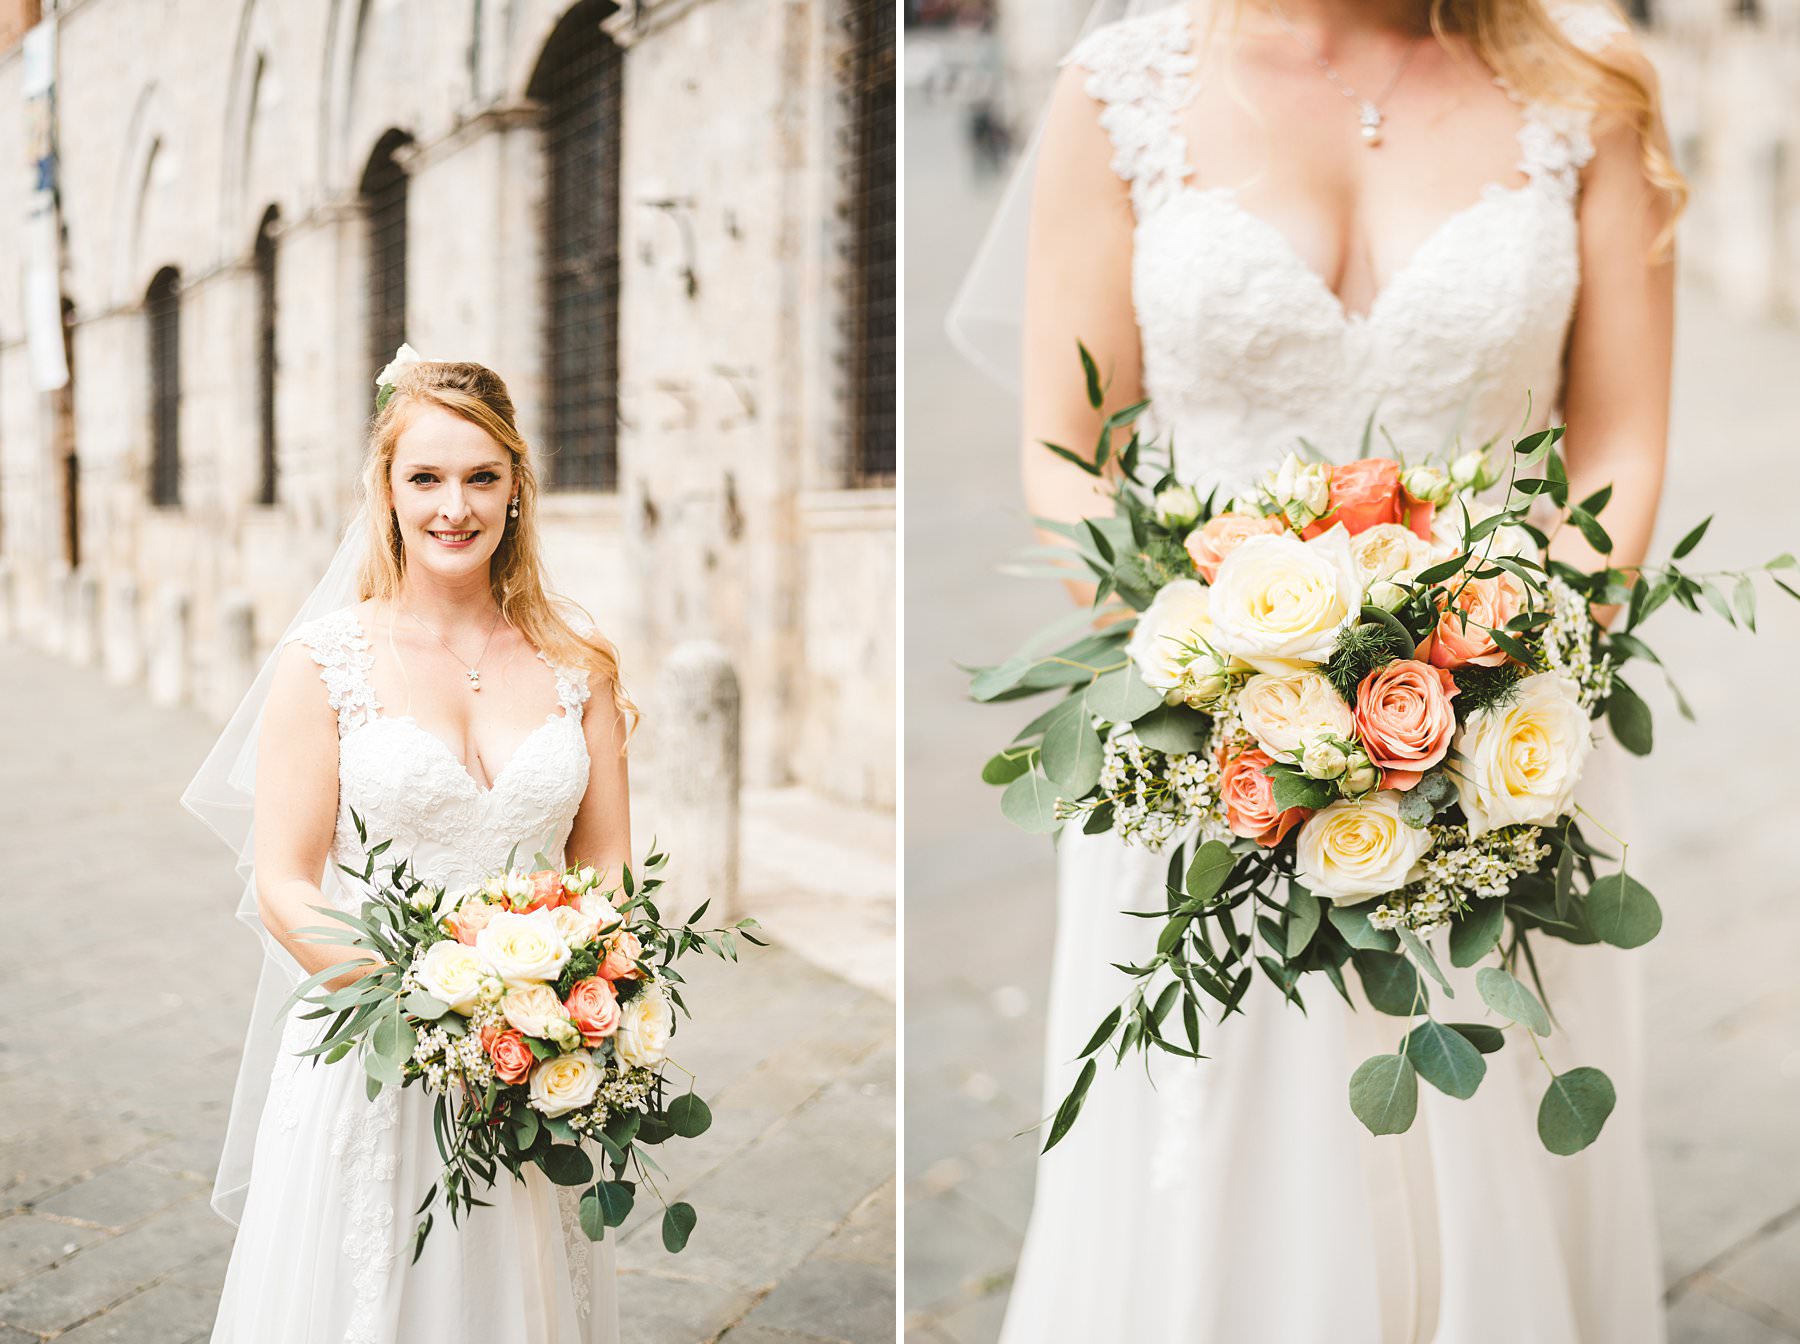 Beautiful bride Poppy from Uk almost ready to walks down the aisle in the Concistoro room in Siena Town hall